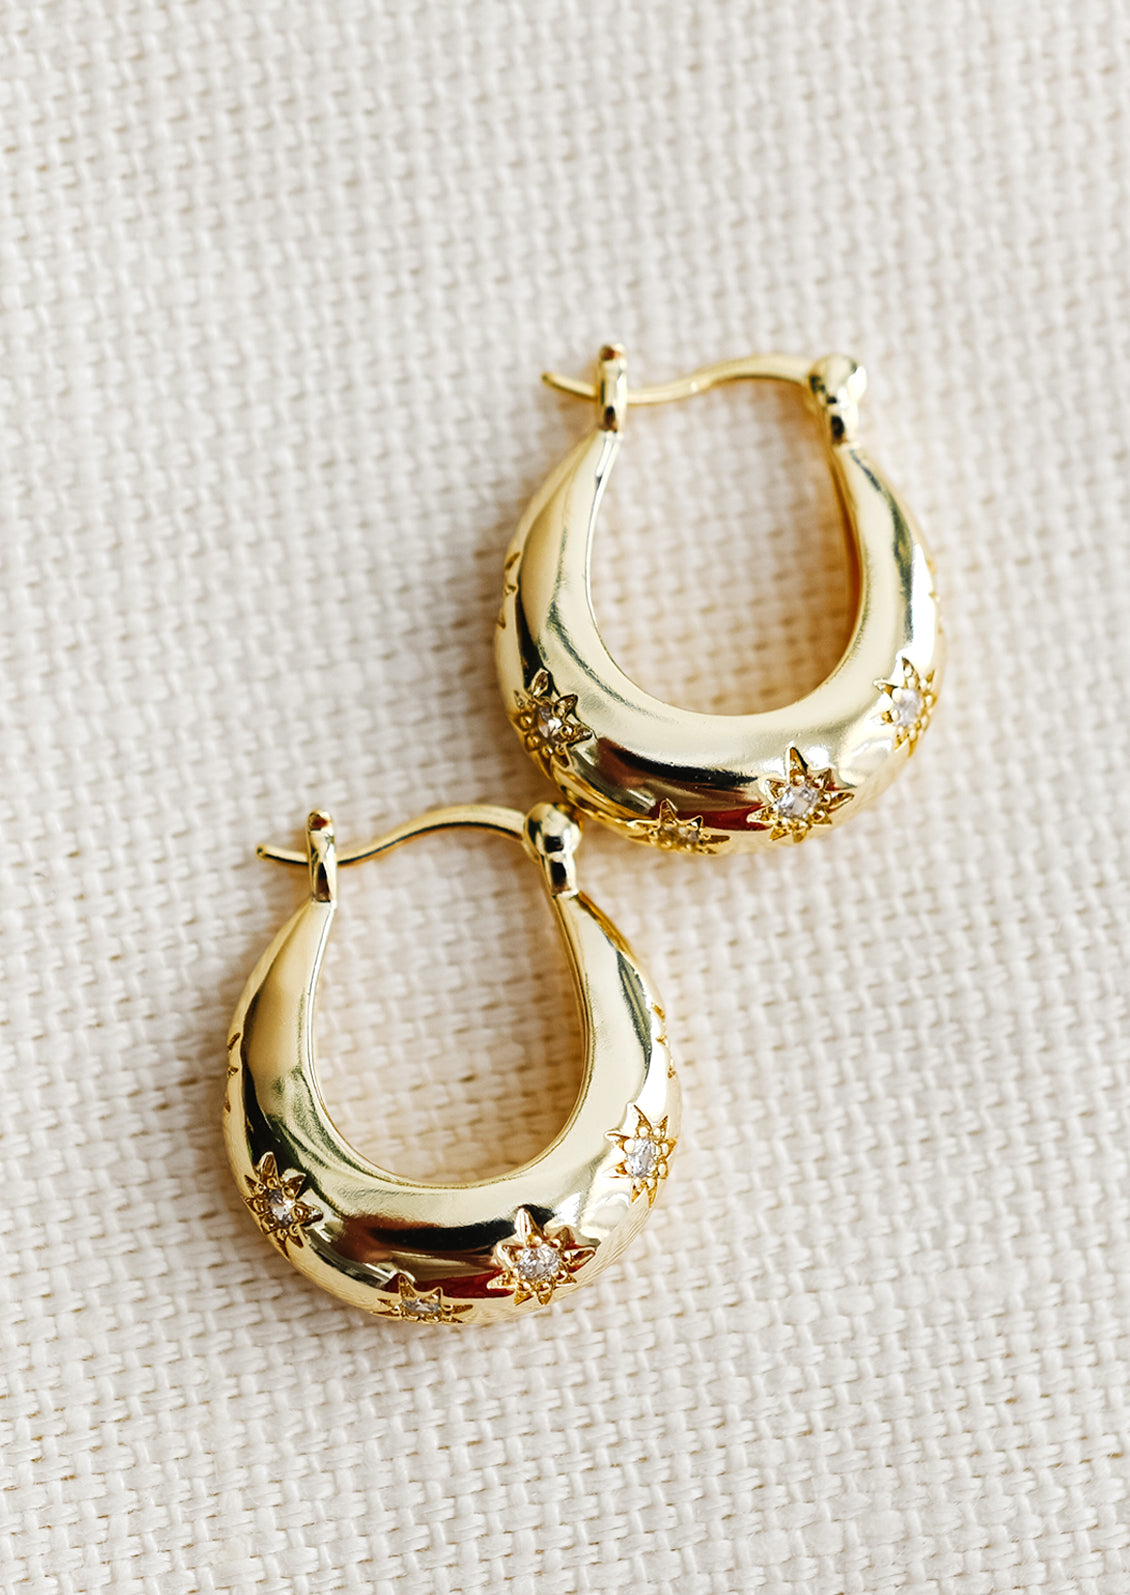 A pair of oblong oval hoops in gold with clear star shaped crystal detailing.